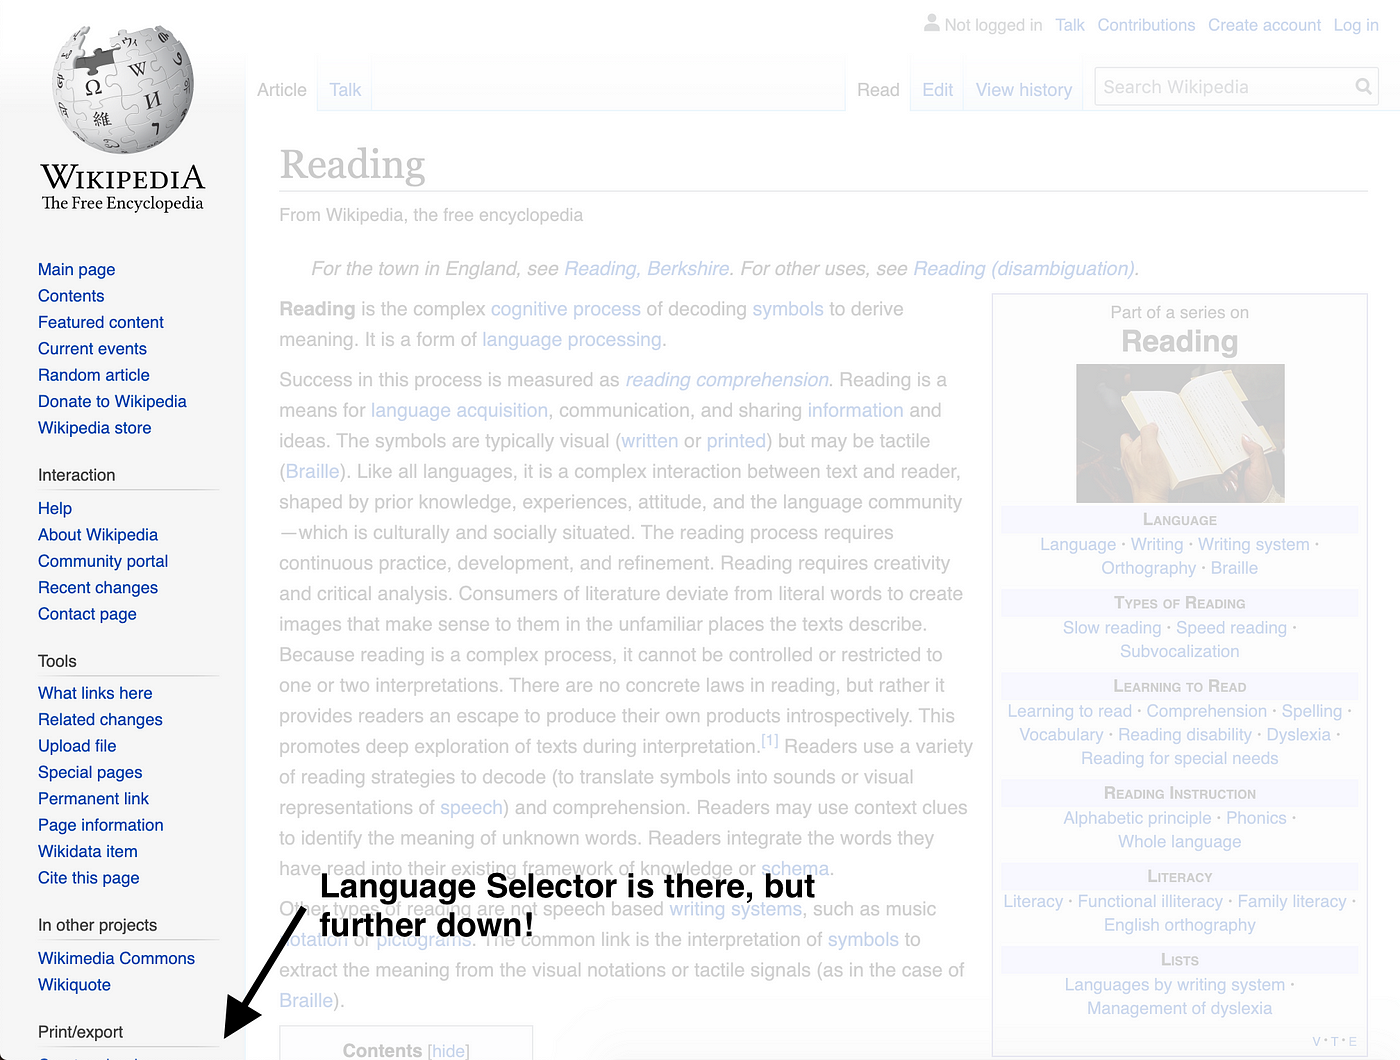 Wikipedia apparently hacked to display swastikas across different pages